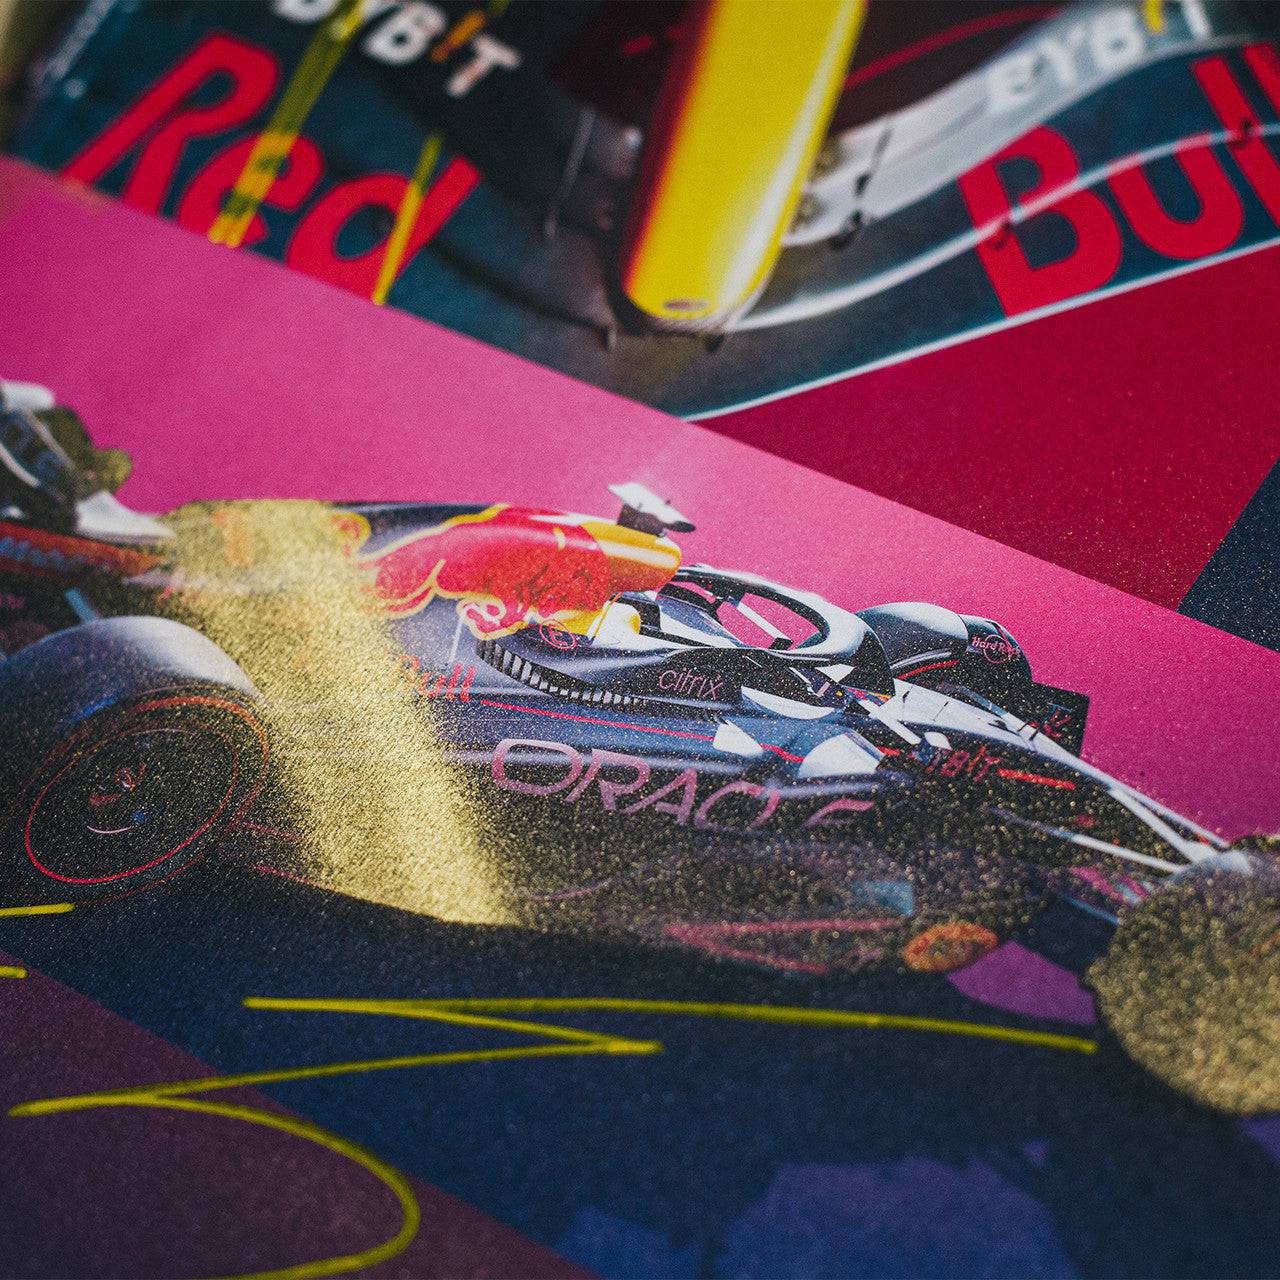 Oracle Red Bull Racing - Max Verstappen - Art to the Max - 2022 | Art Edition | #13/25